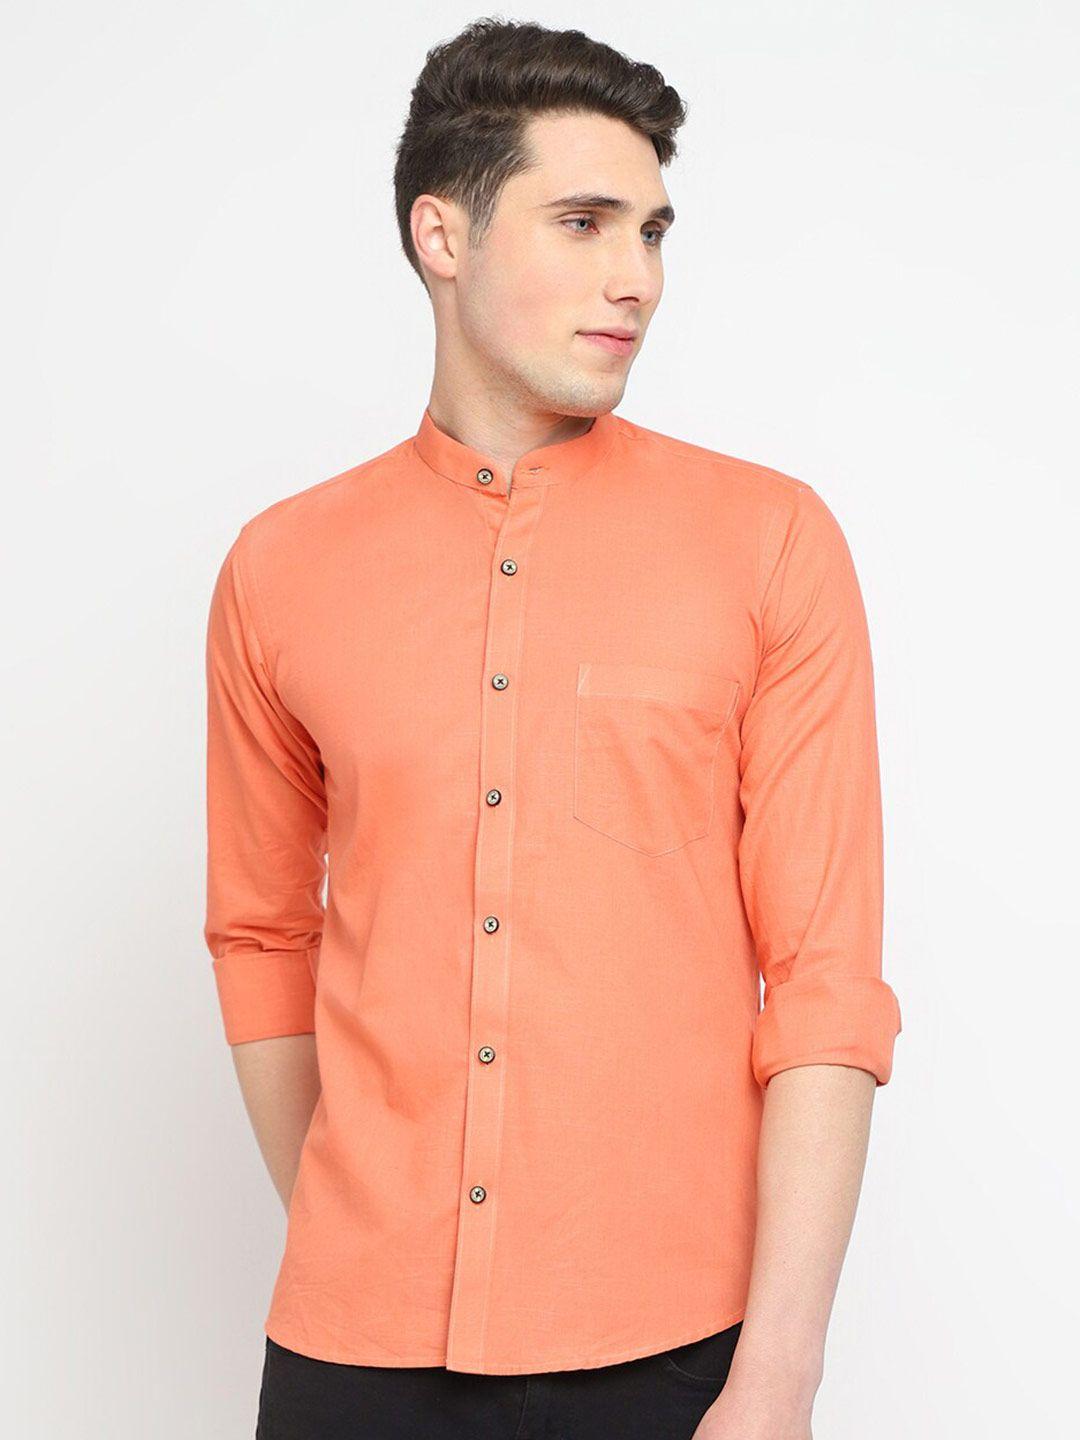 jadeberry-classic-slim-fit-opaque-cotton-casual-shirt